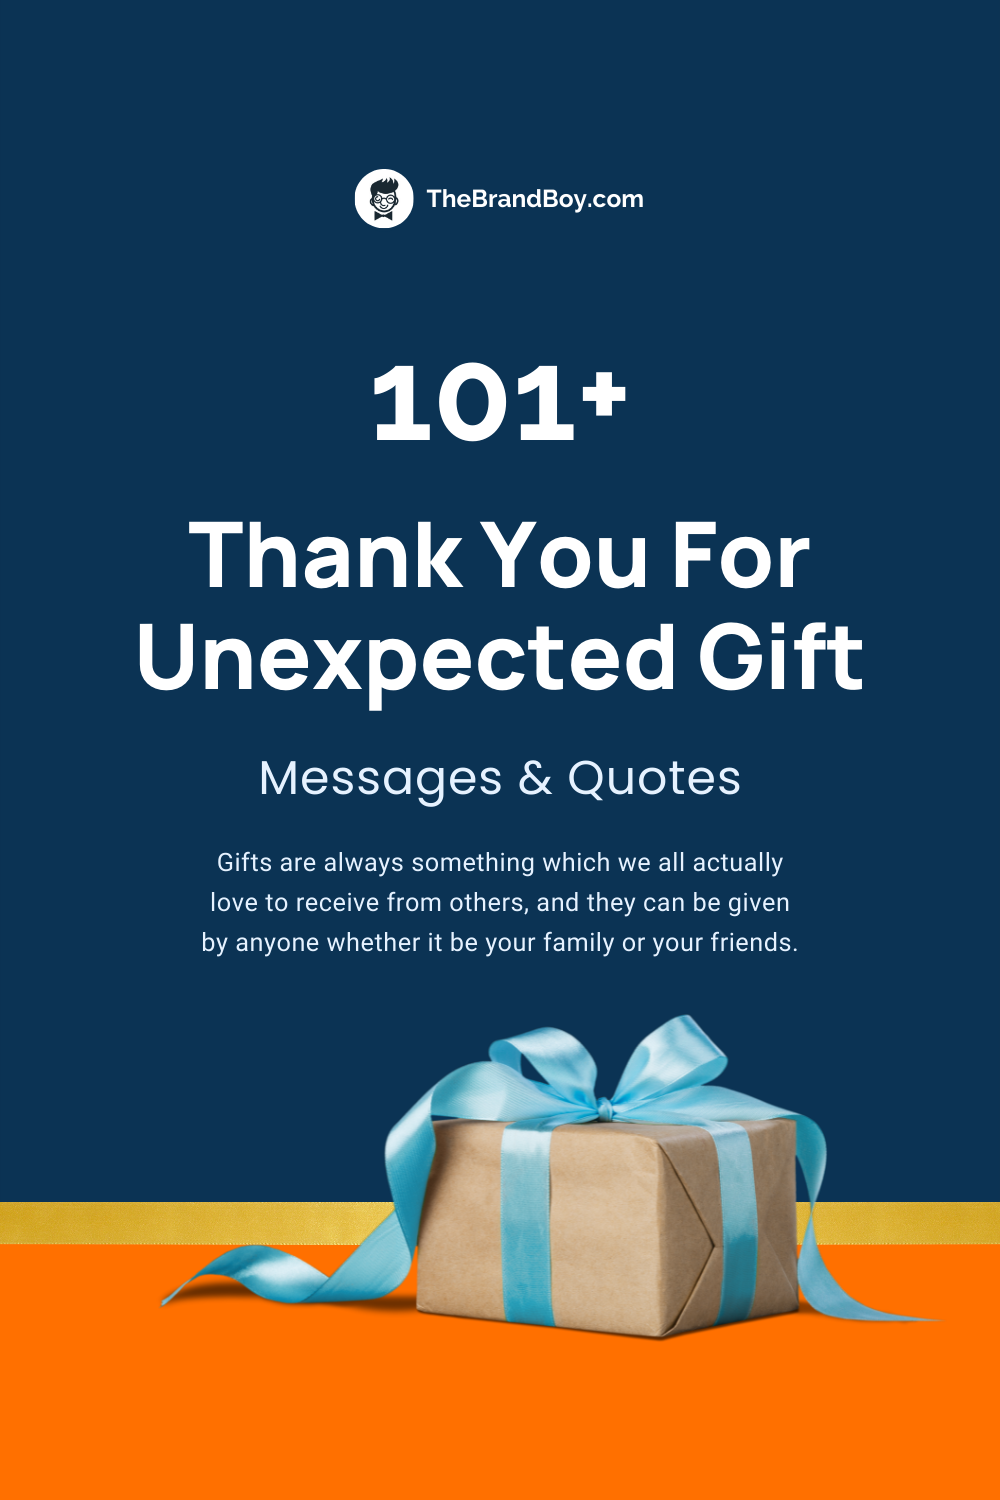 Thank you for Unexpected Gift 225+ Messages And Quotes